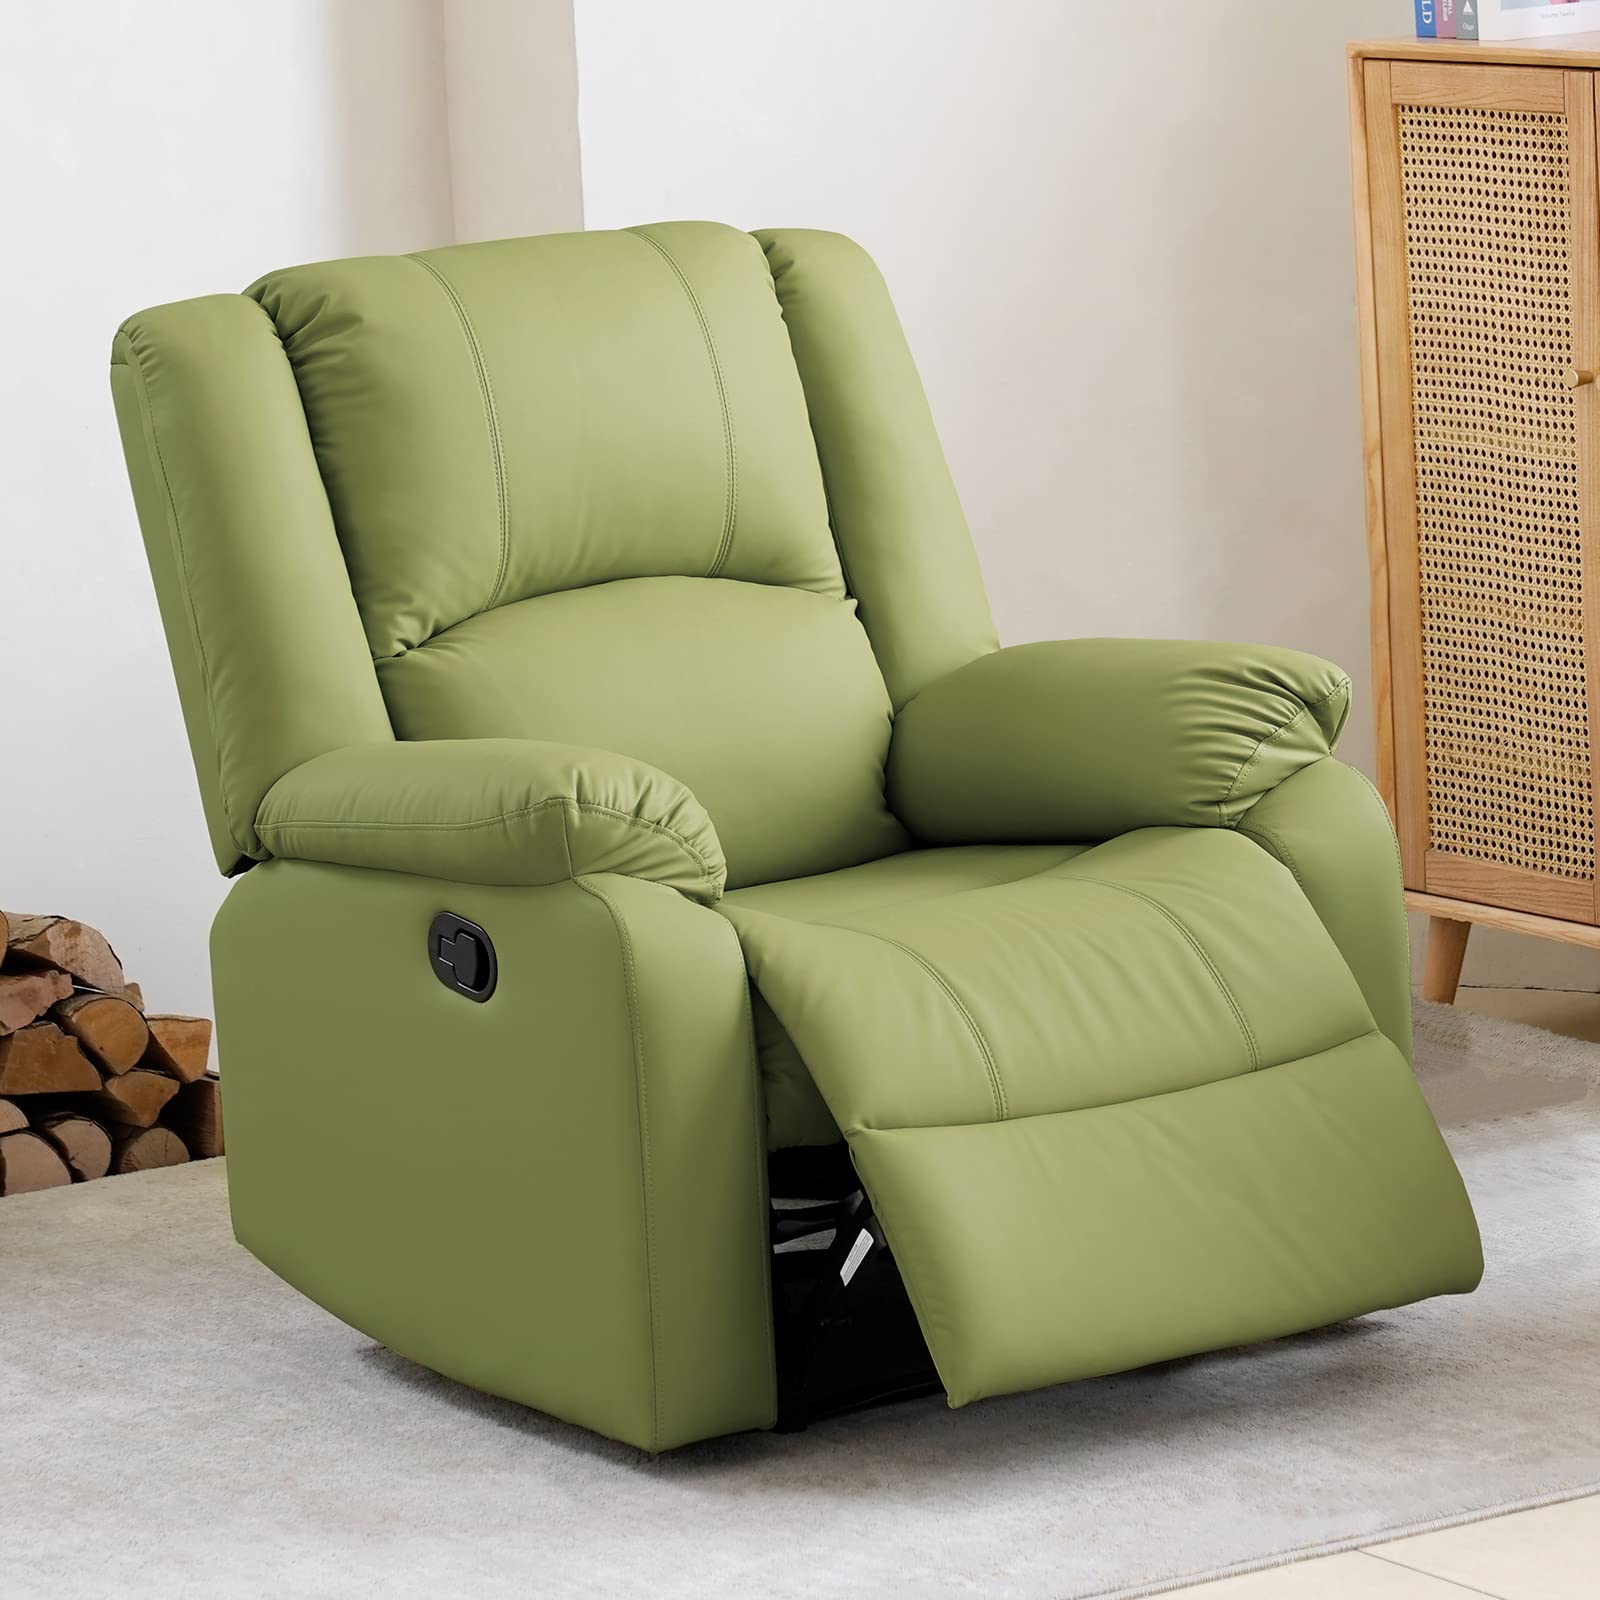 Coosleephome Best Leather Manual Recliner for Sleeping